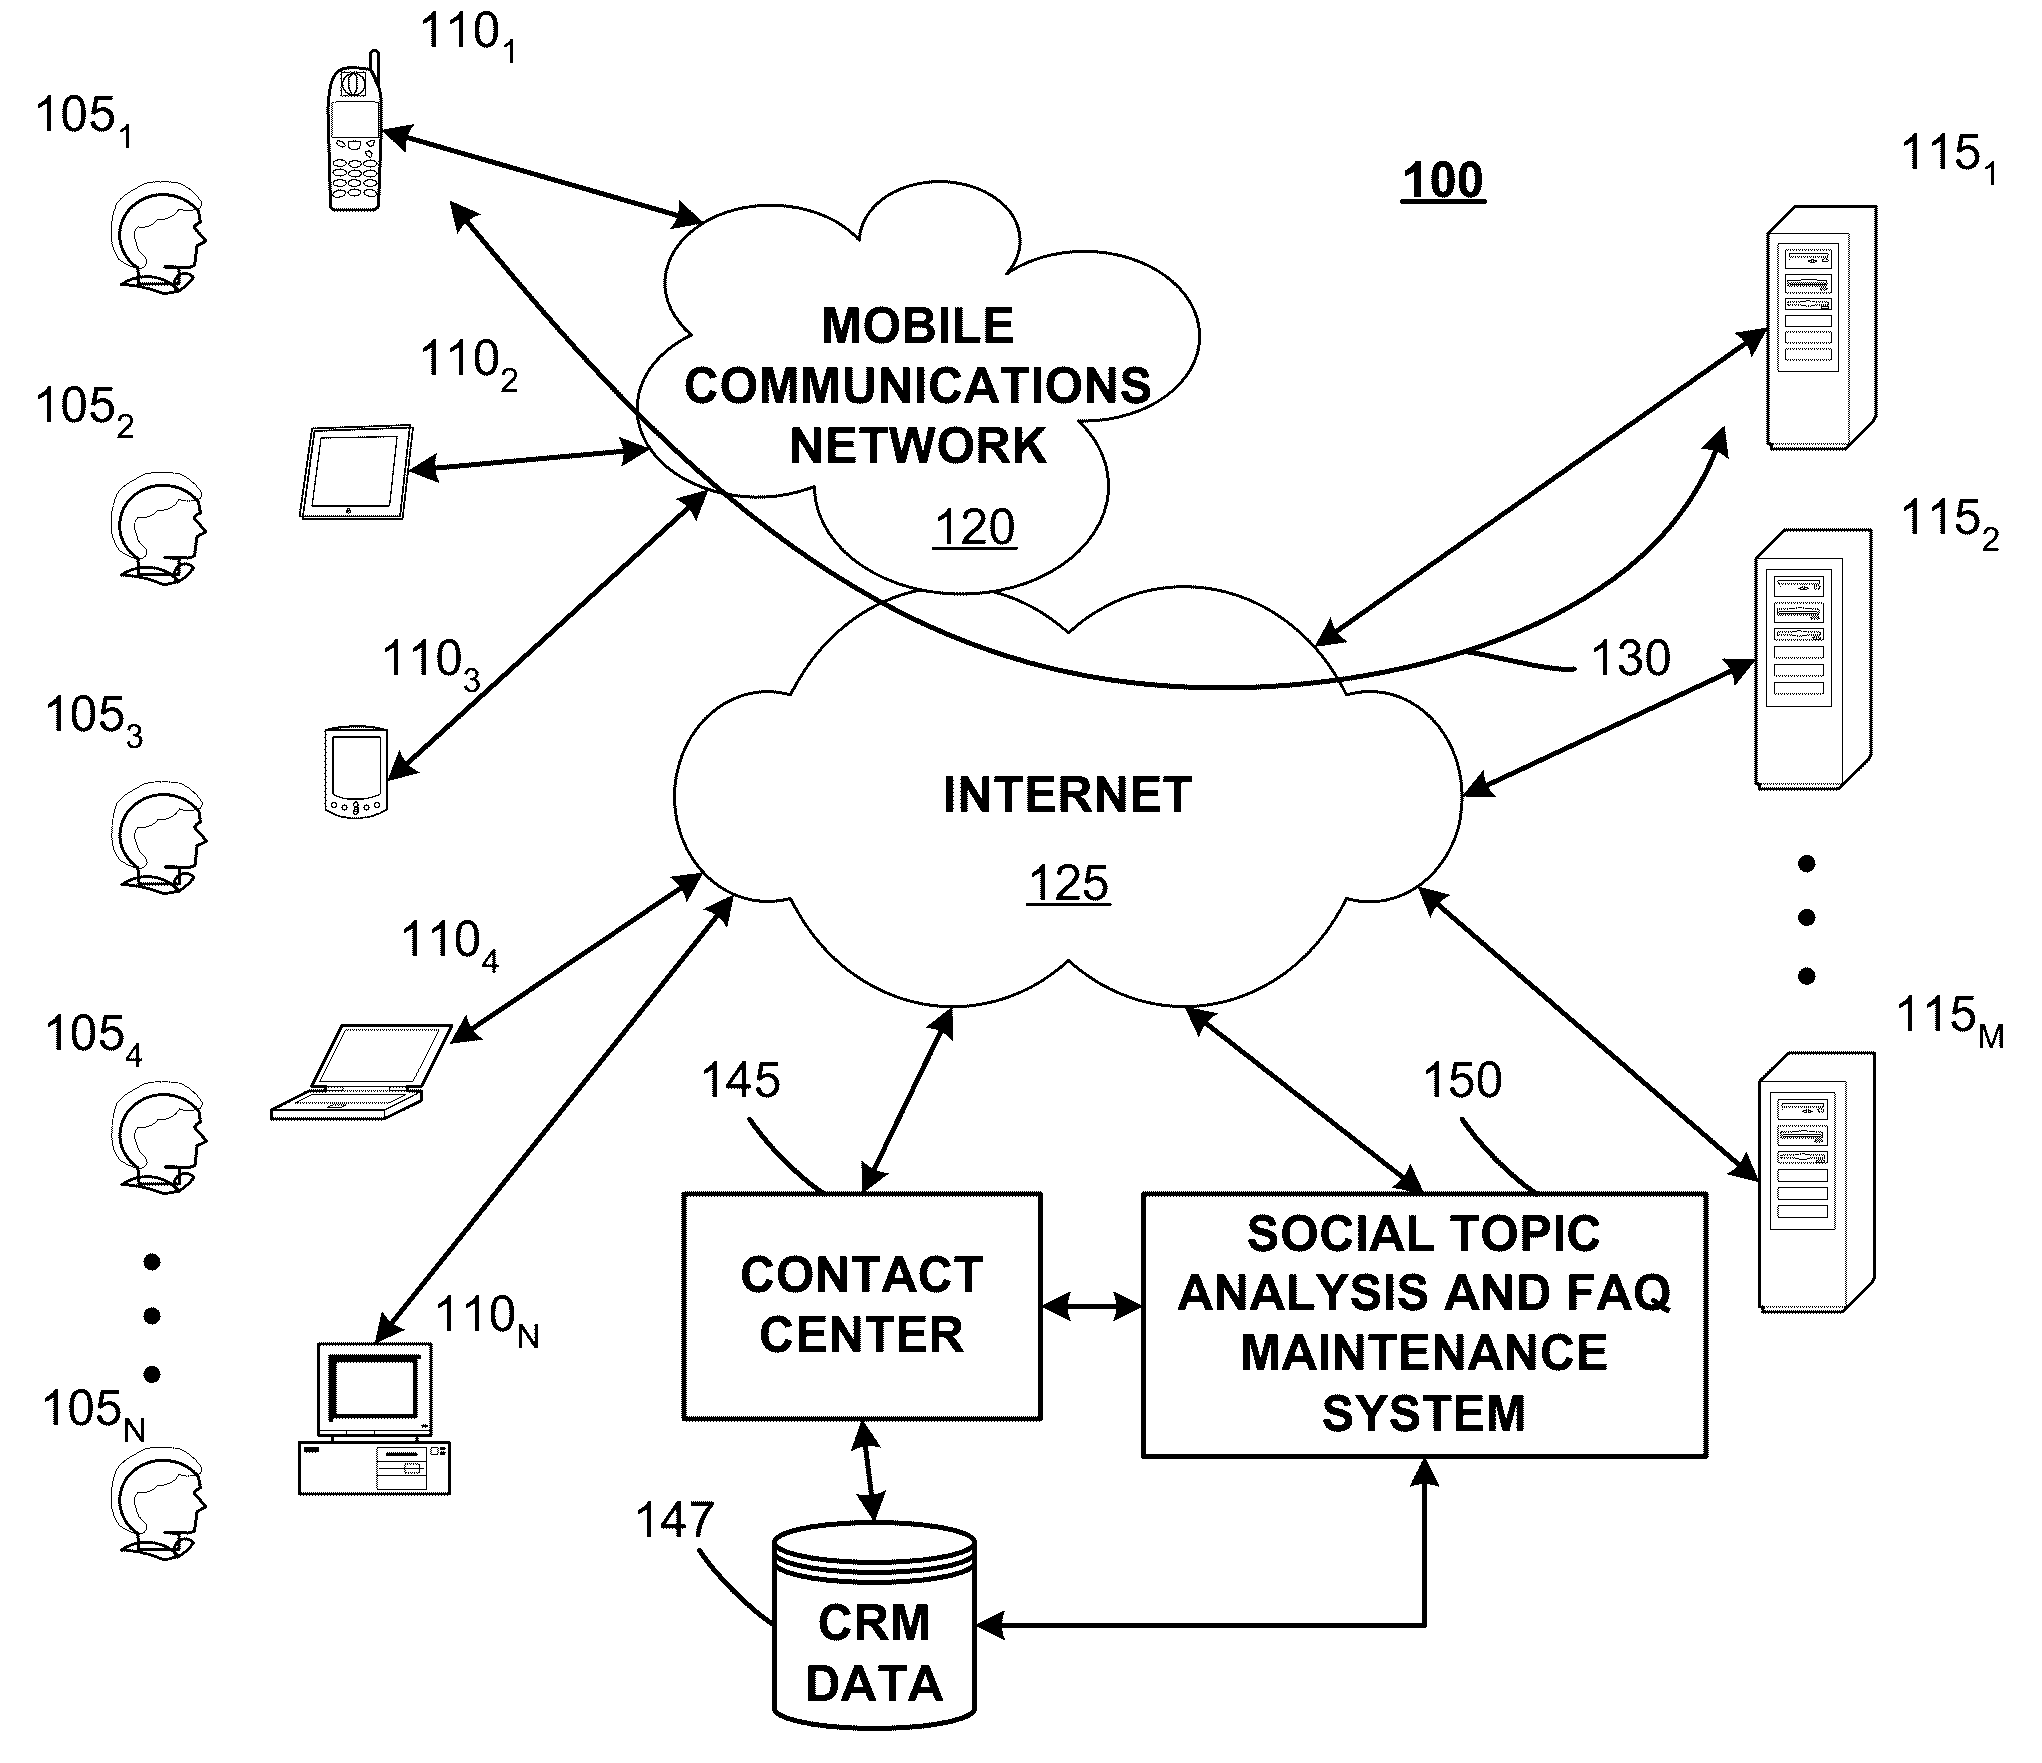 System and method for compiling and dynamically updating a collection of frequently asked questions